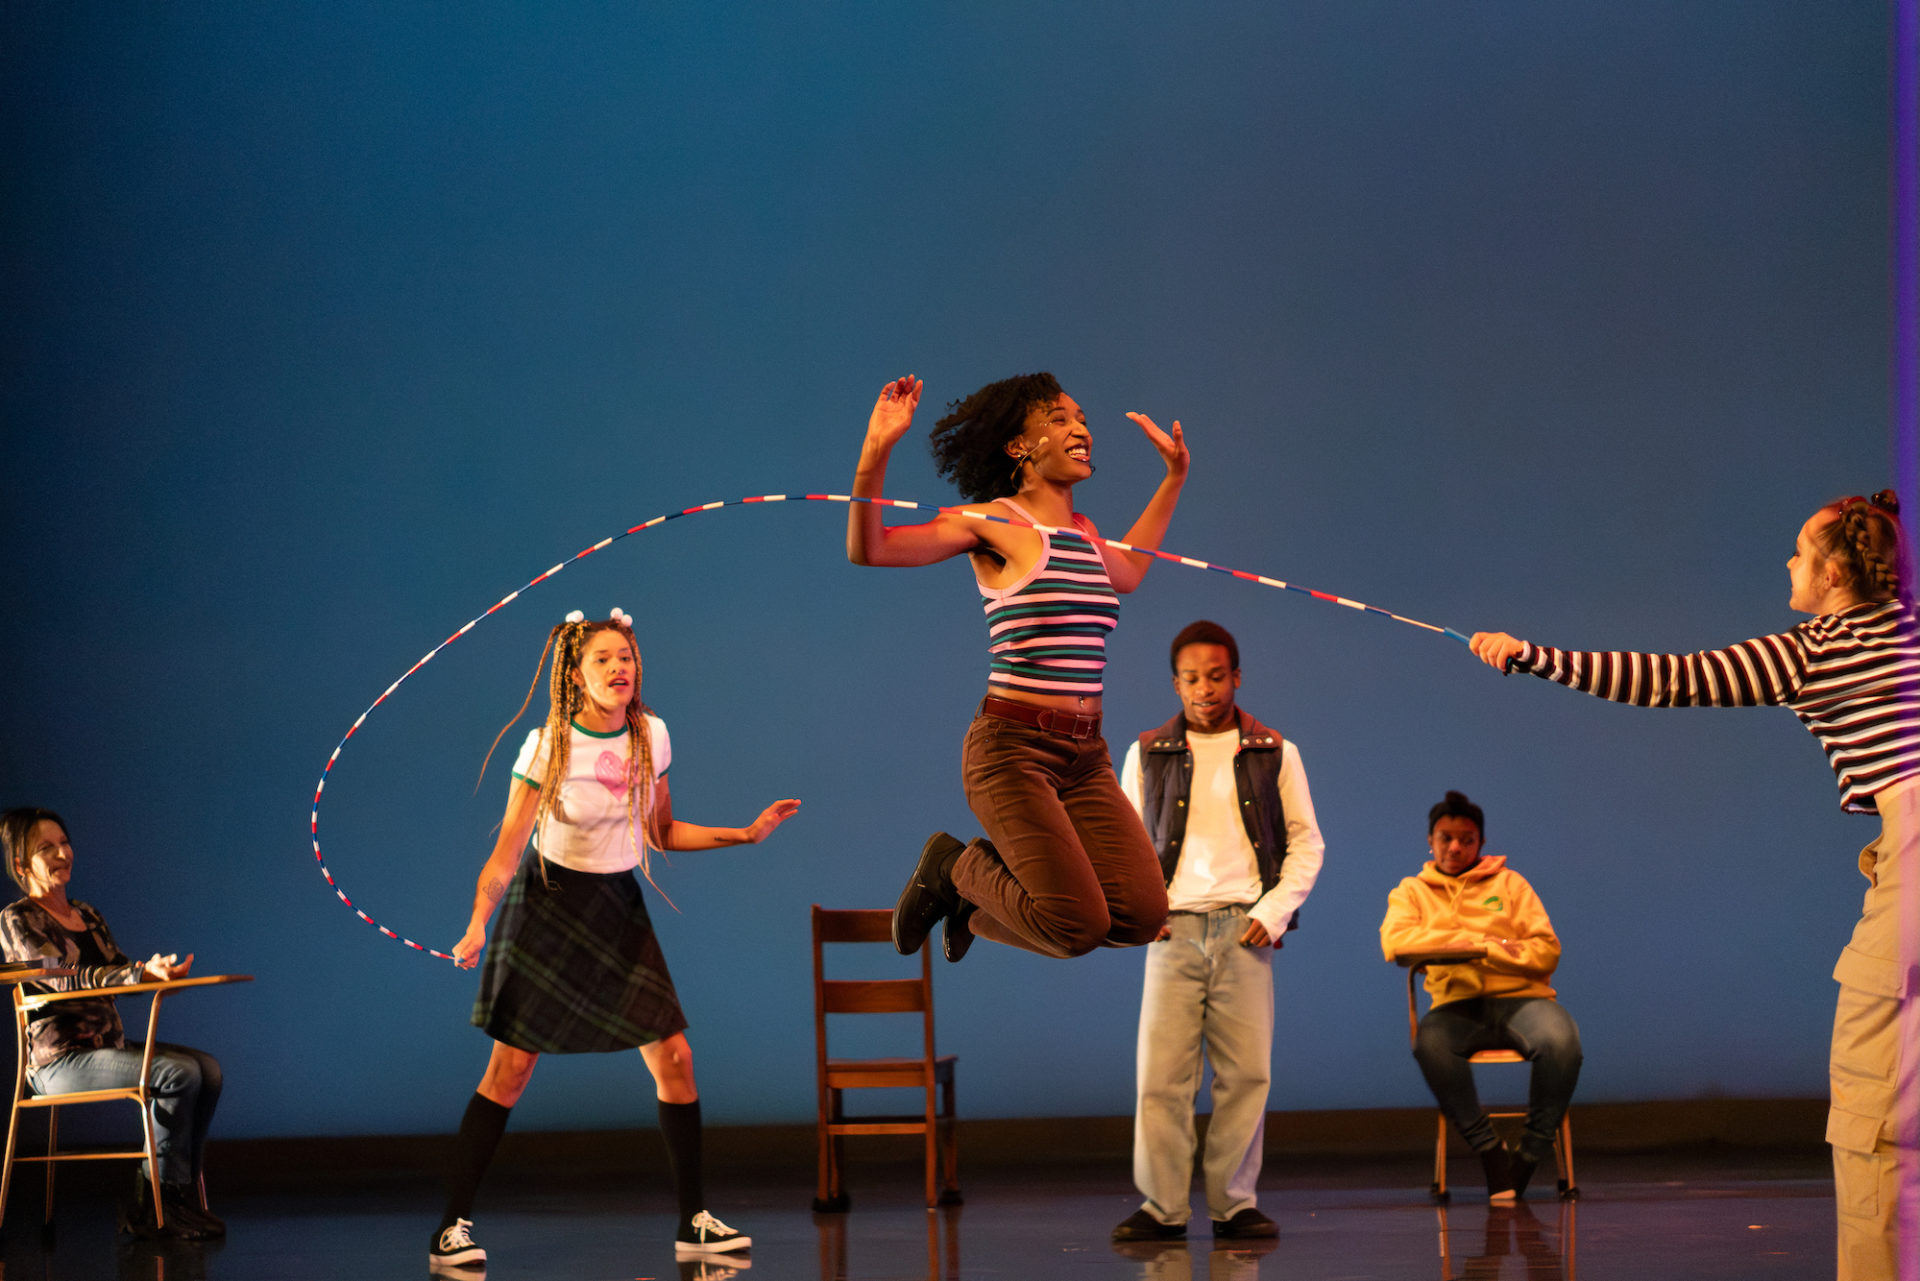 Dancers on stage against a blue backdrop. A black dancer is jumping rope as two other dancers swing the rope and others sit at desks surrounding the stage